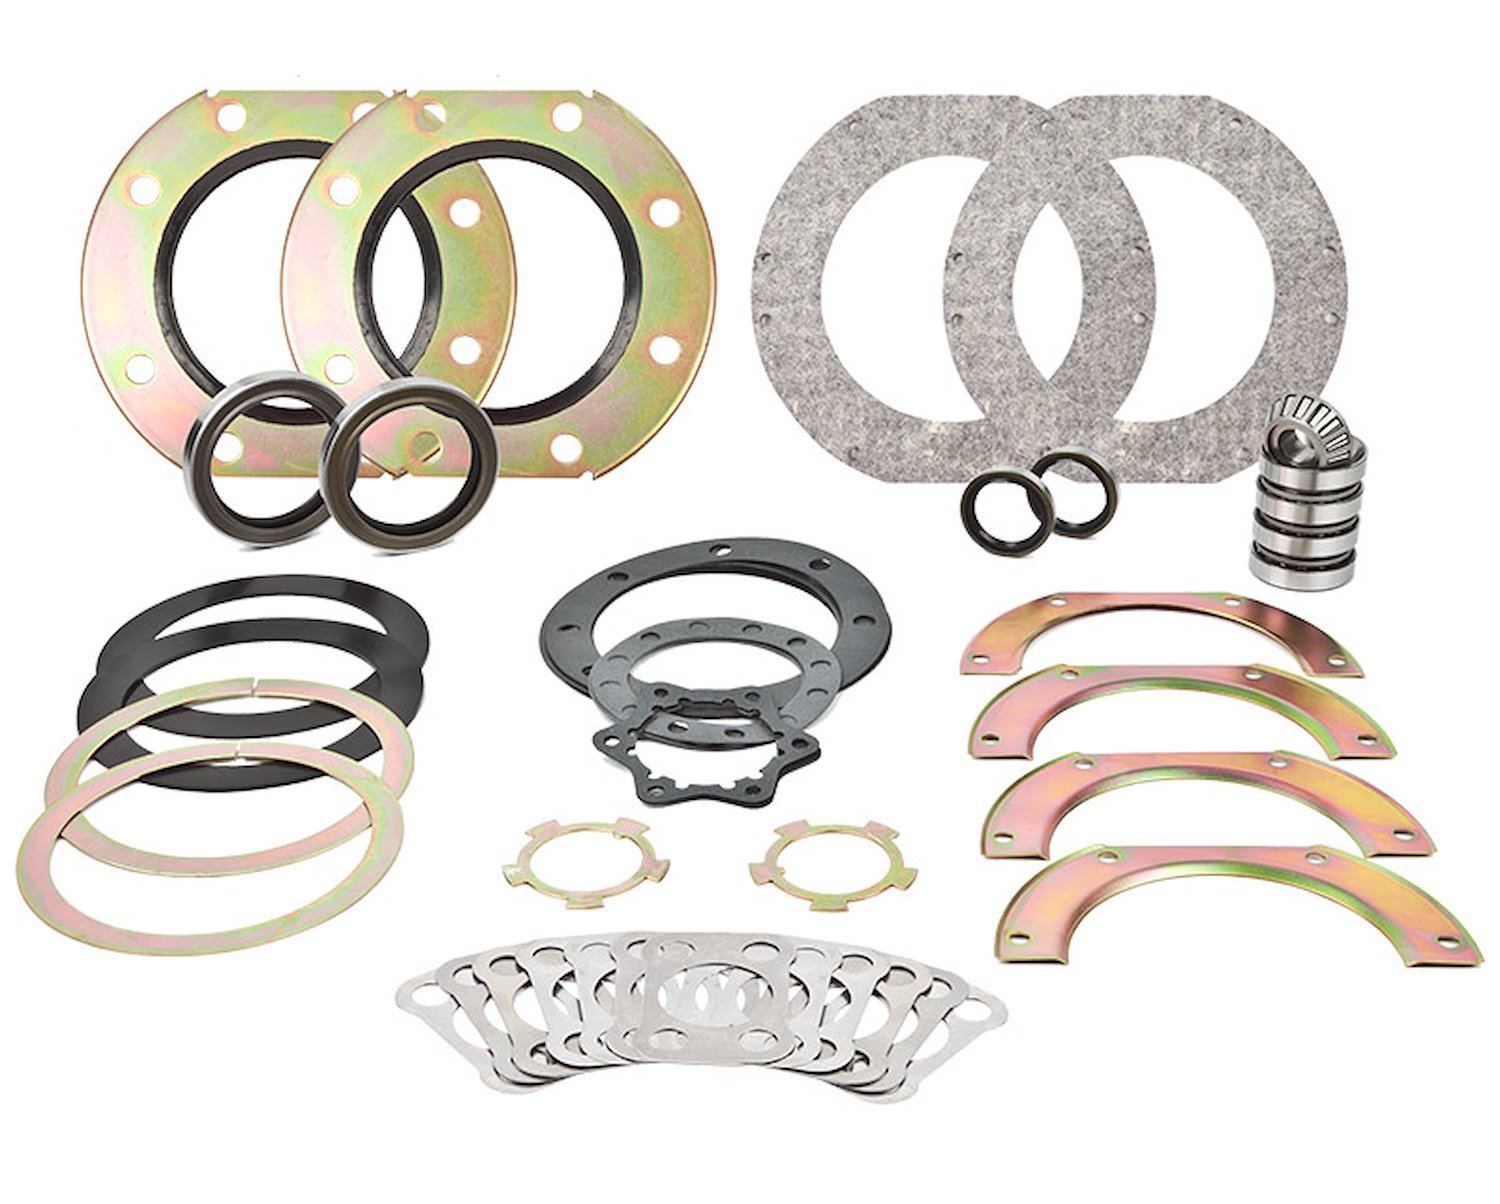 140006-1-KIT Knuckle Rebuild Kit 1979-1995 Toyota Pickup (All Engines) 1985-1995 Toyota 4Runner (All Engines)